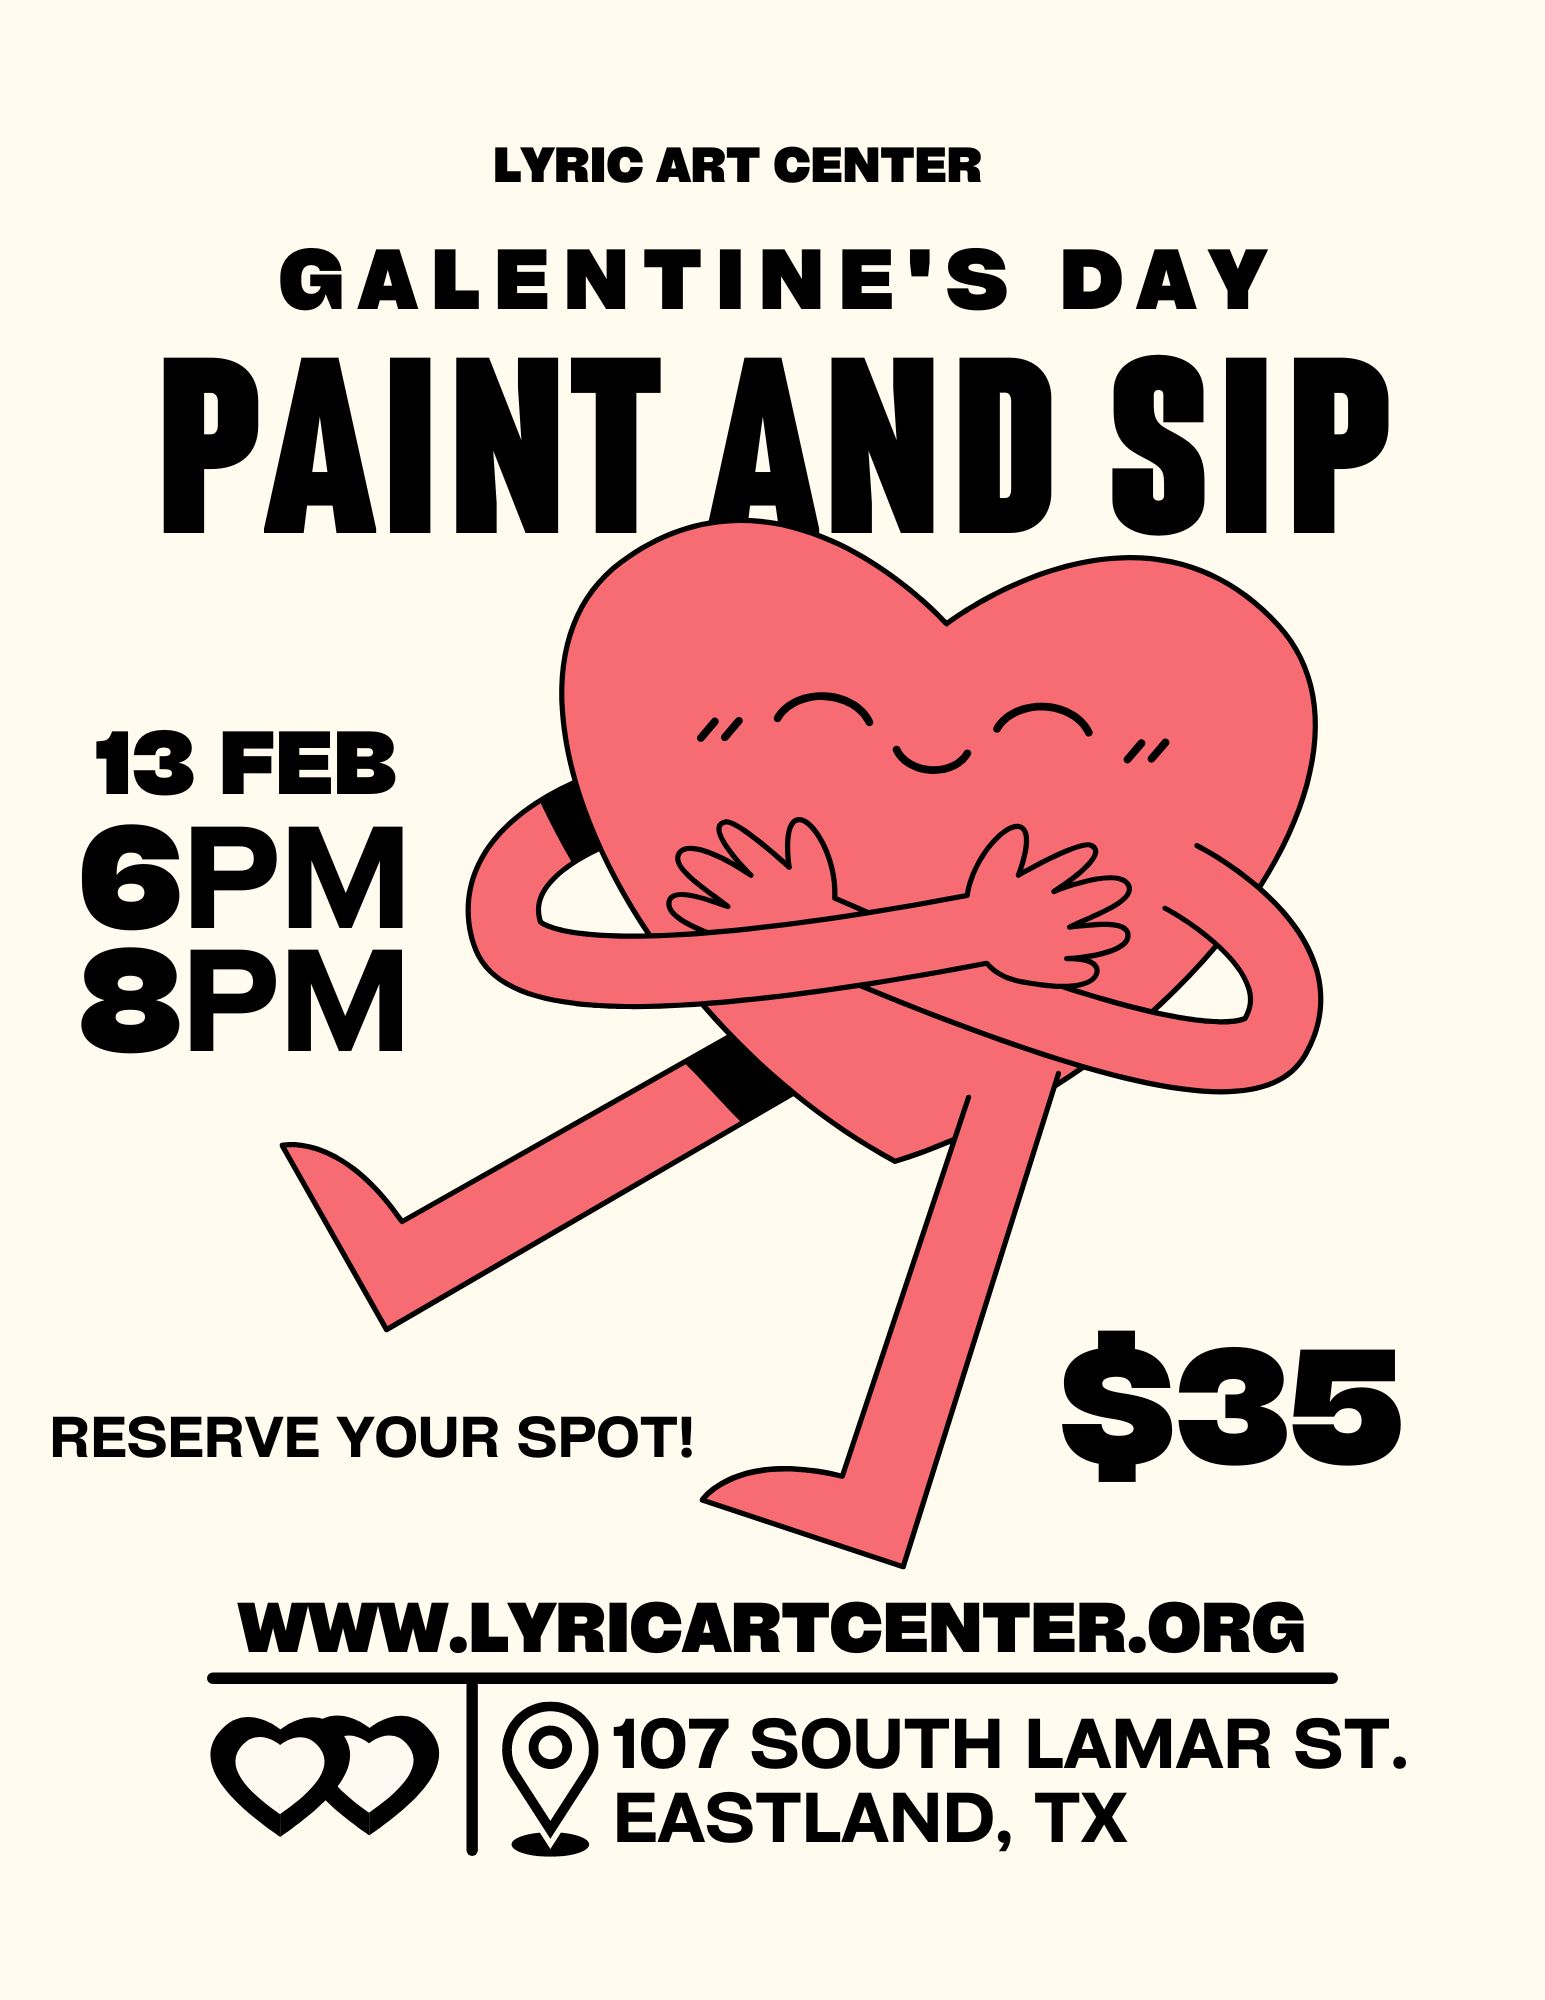 February 13th at the Lyric Art Center in Eastland.  Reserve your spot online...